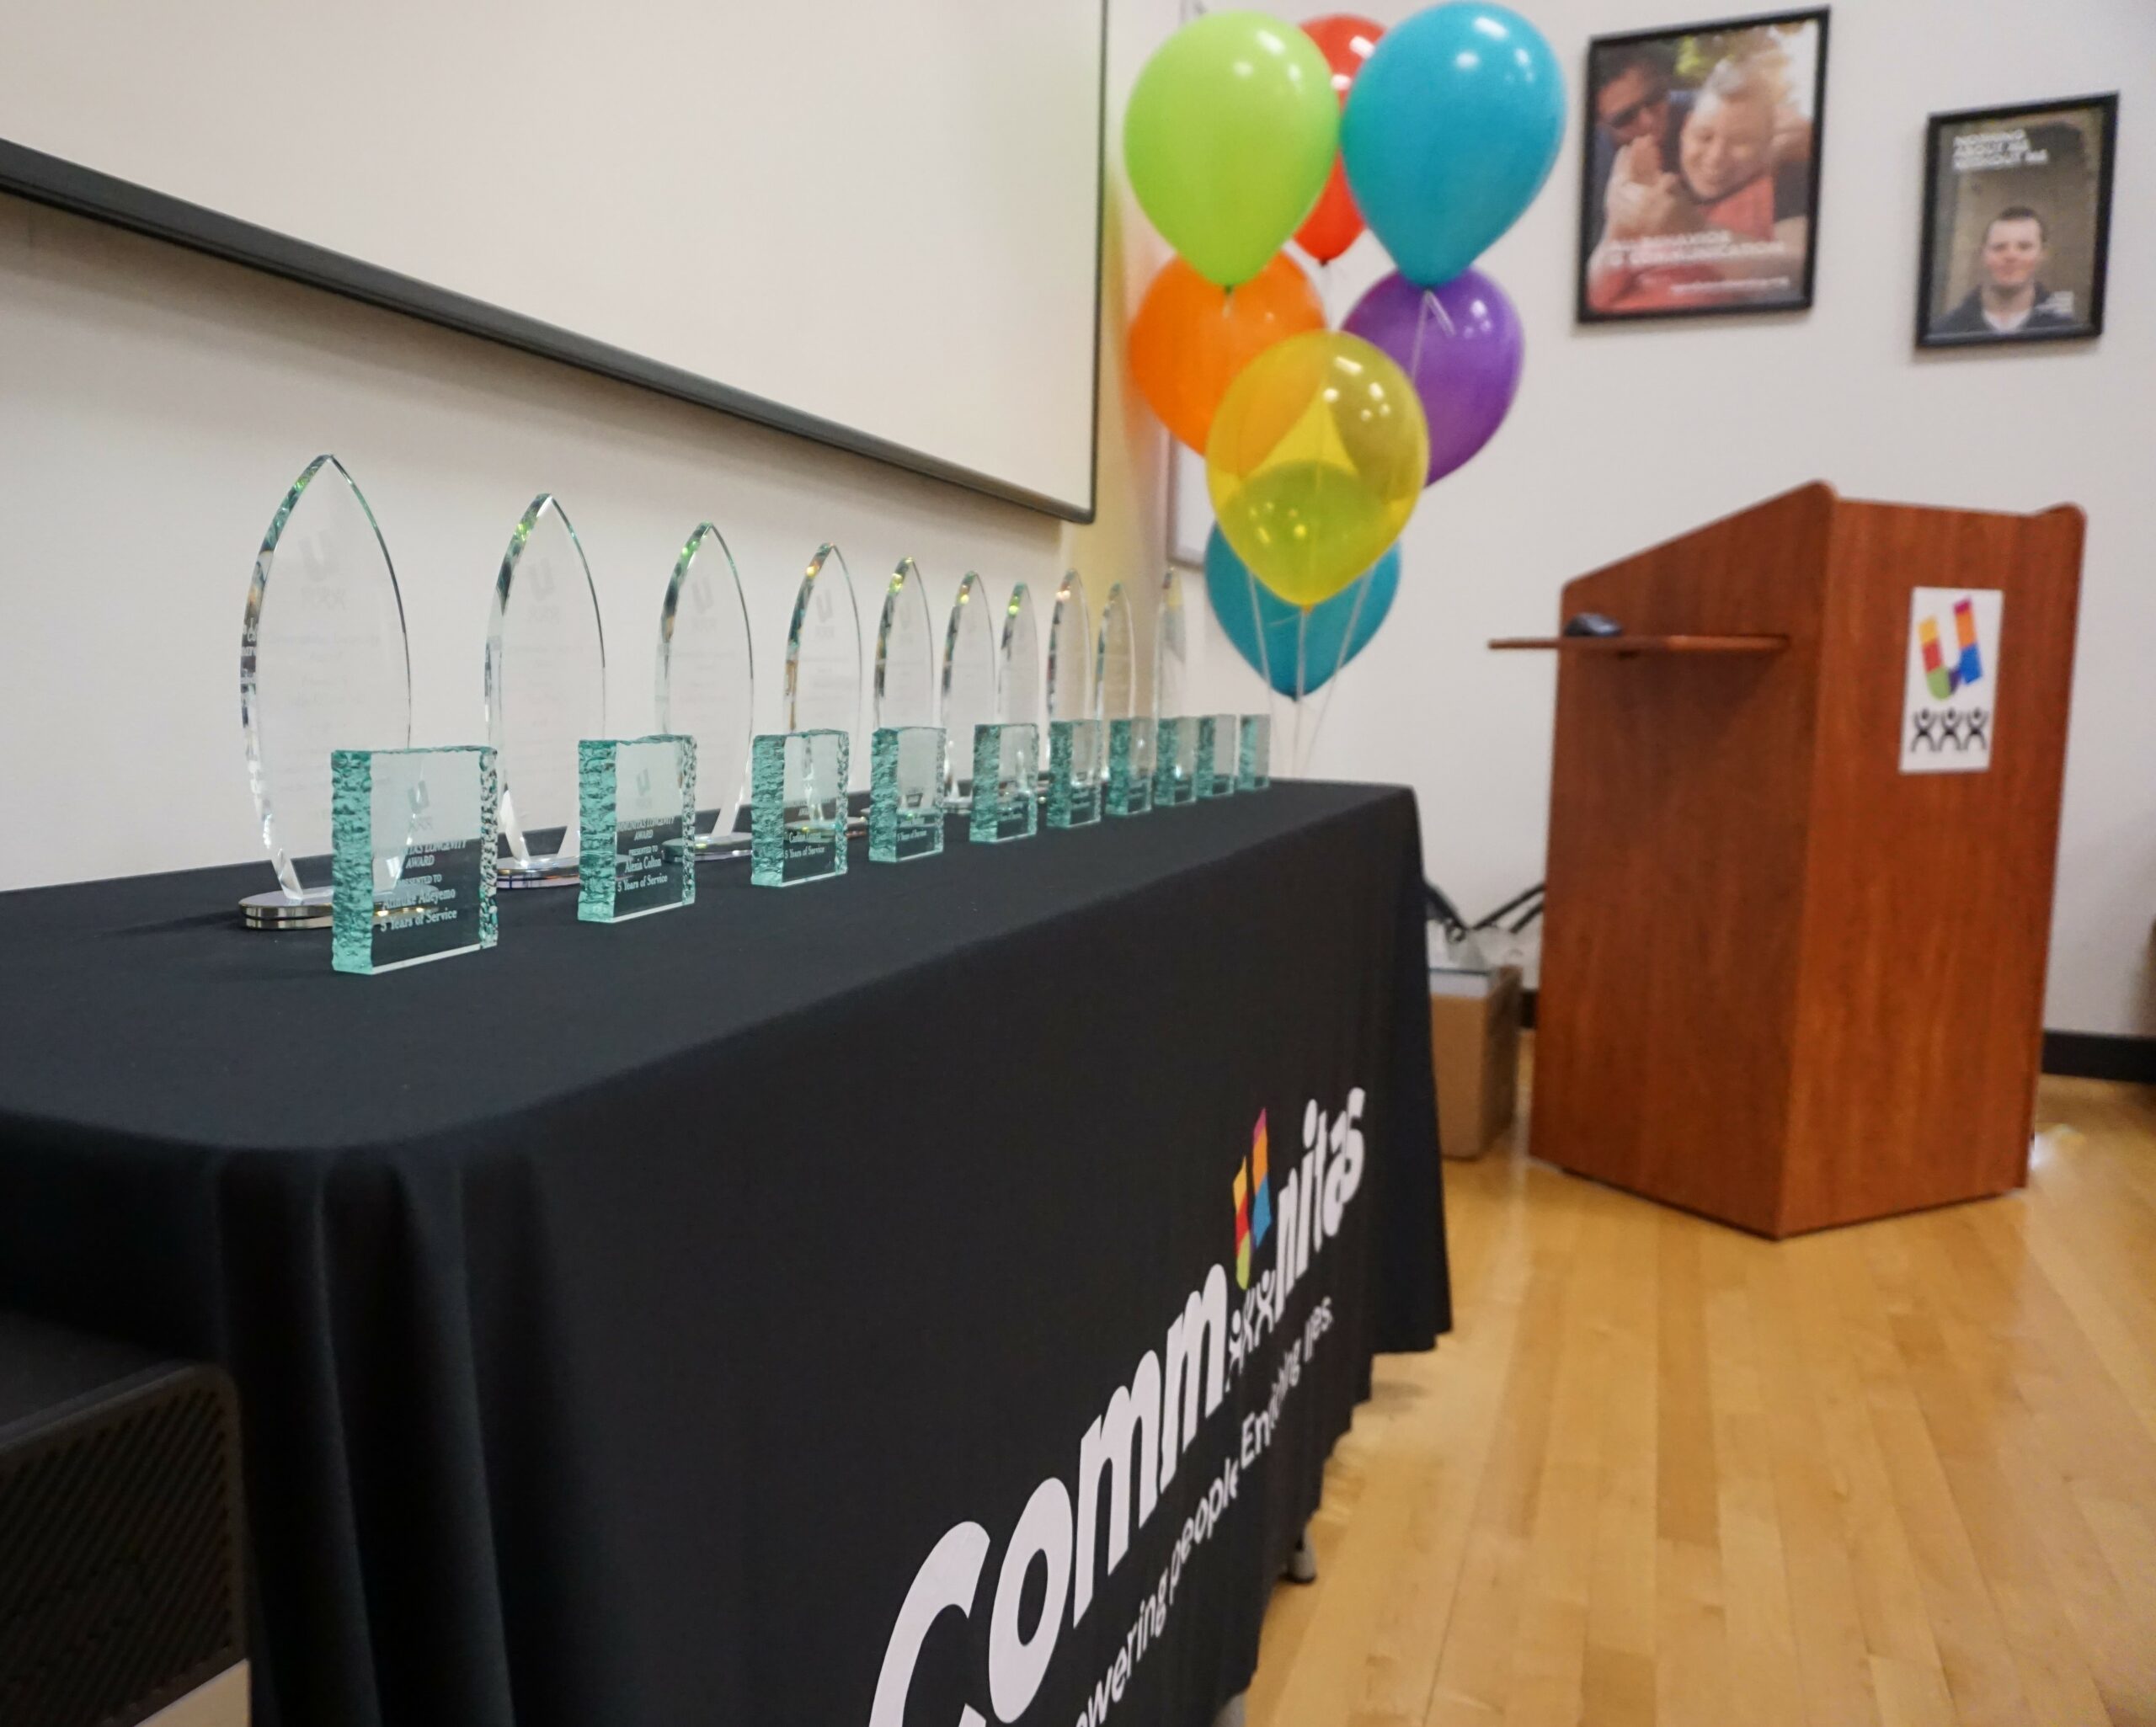 table of awards, with colorful balloons at the end